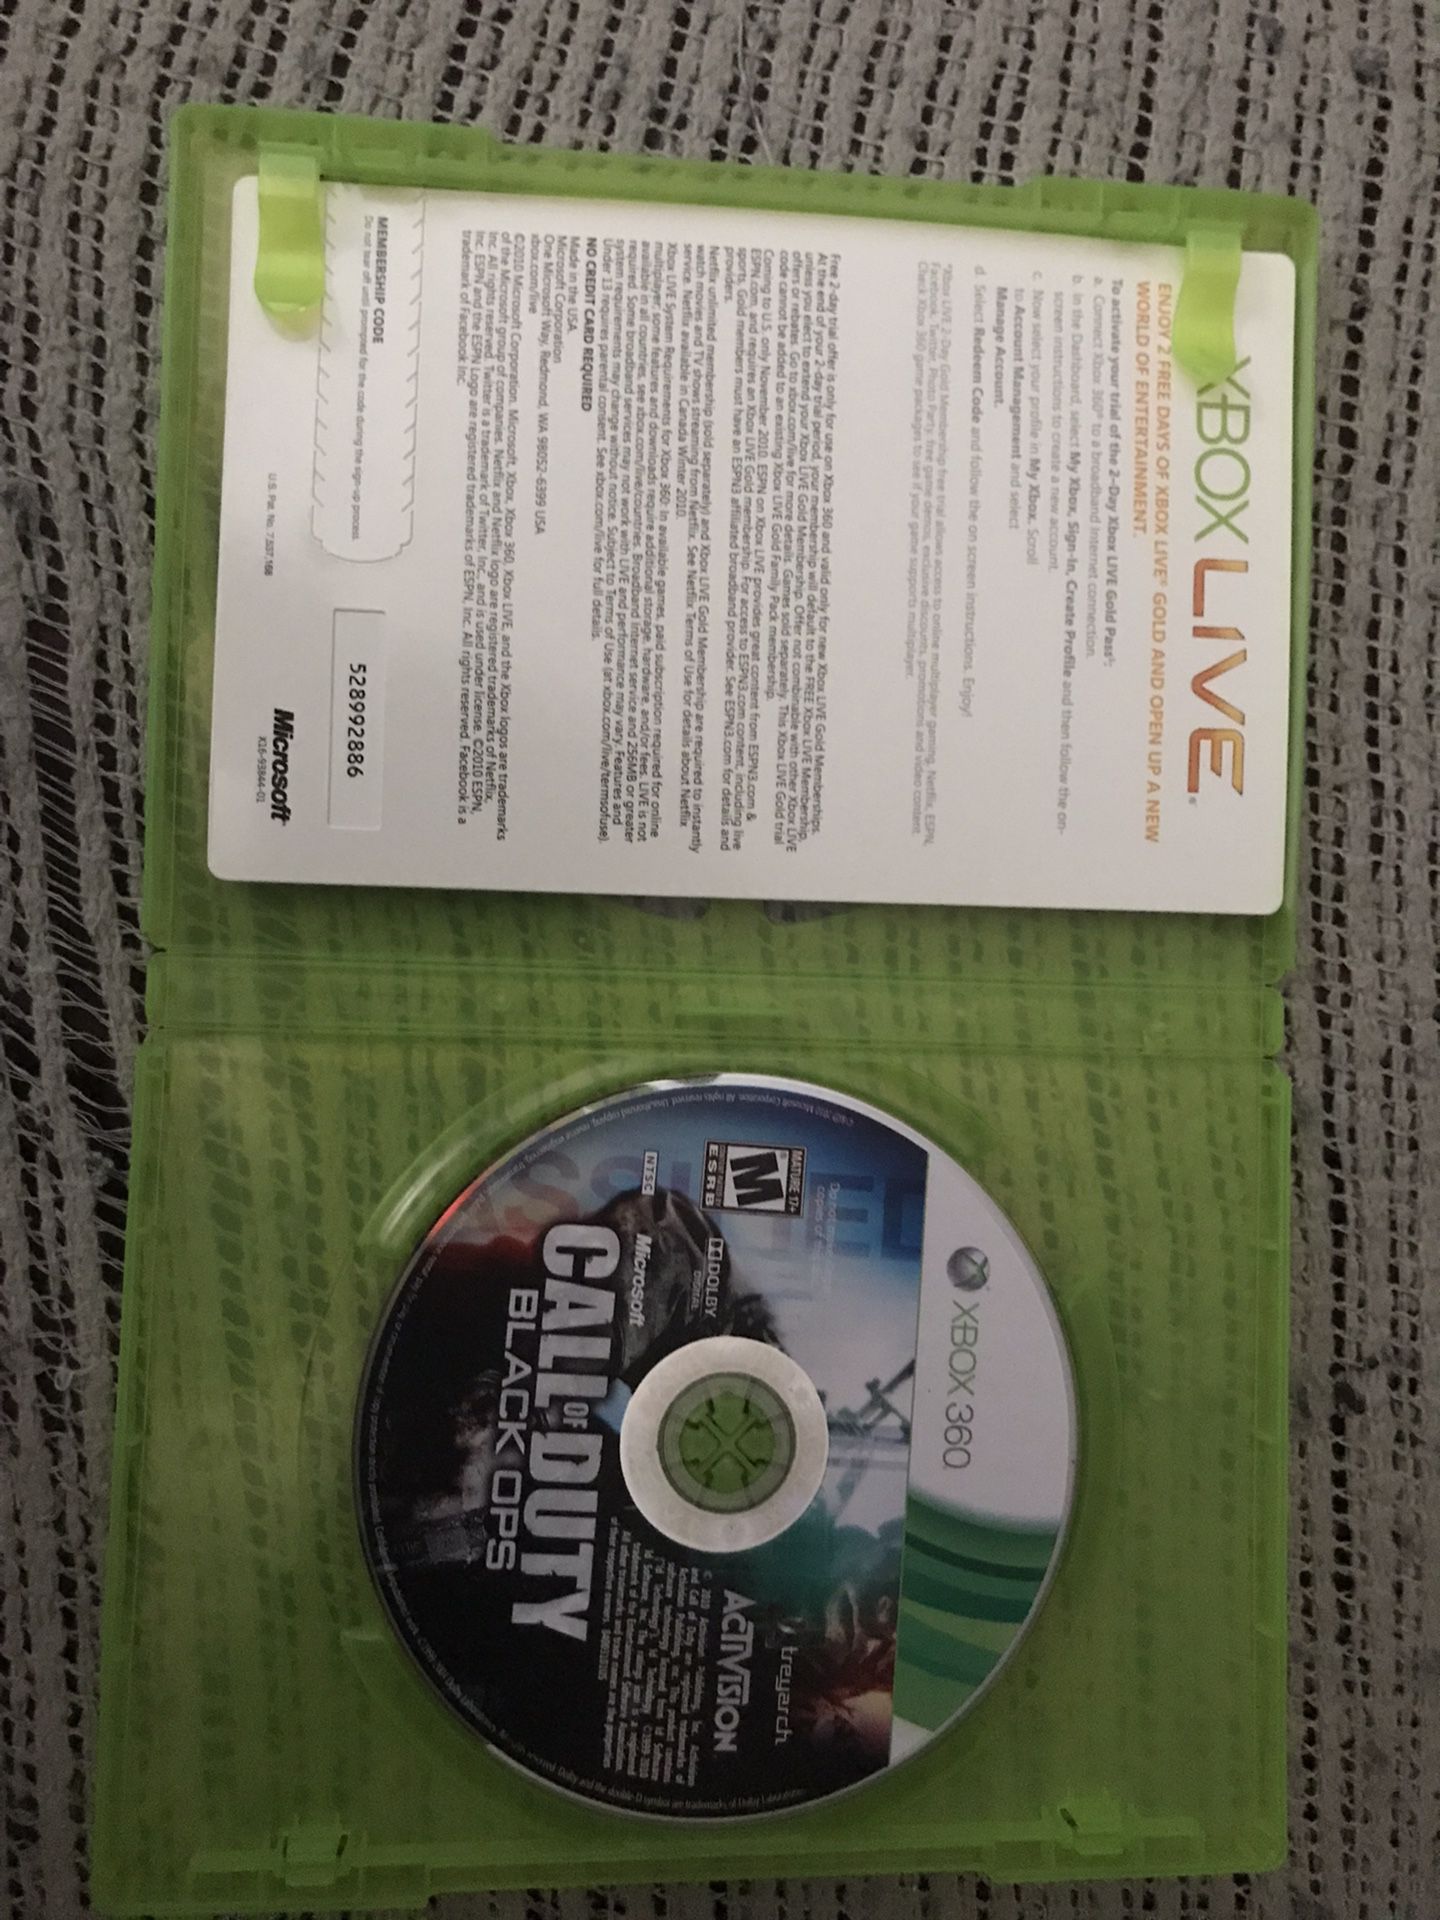 Lnew Xbox 360 call of duty black ops game only $30